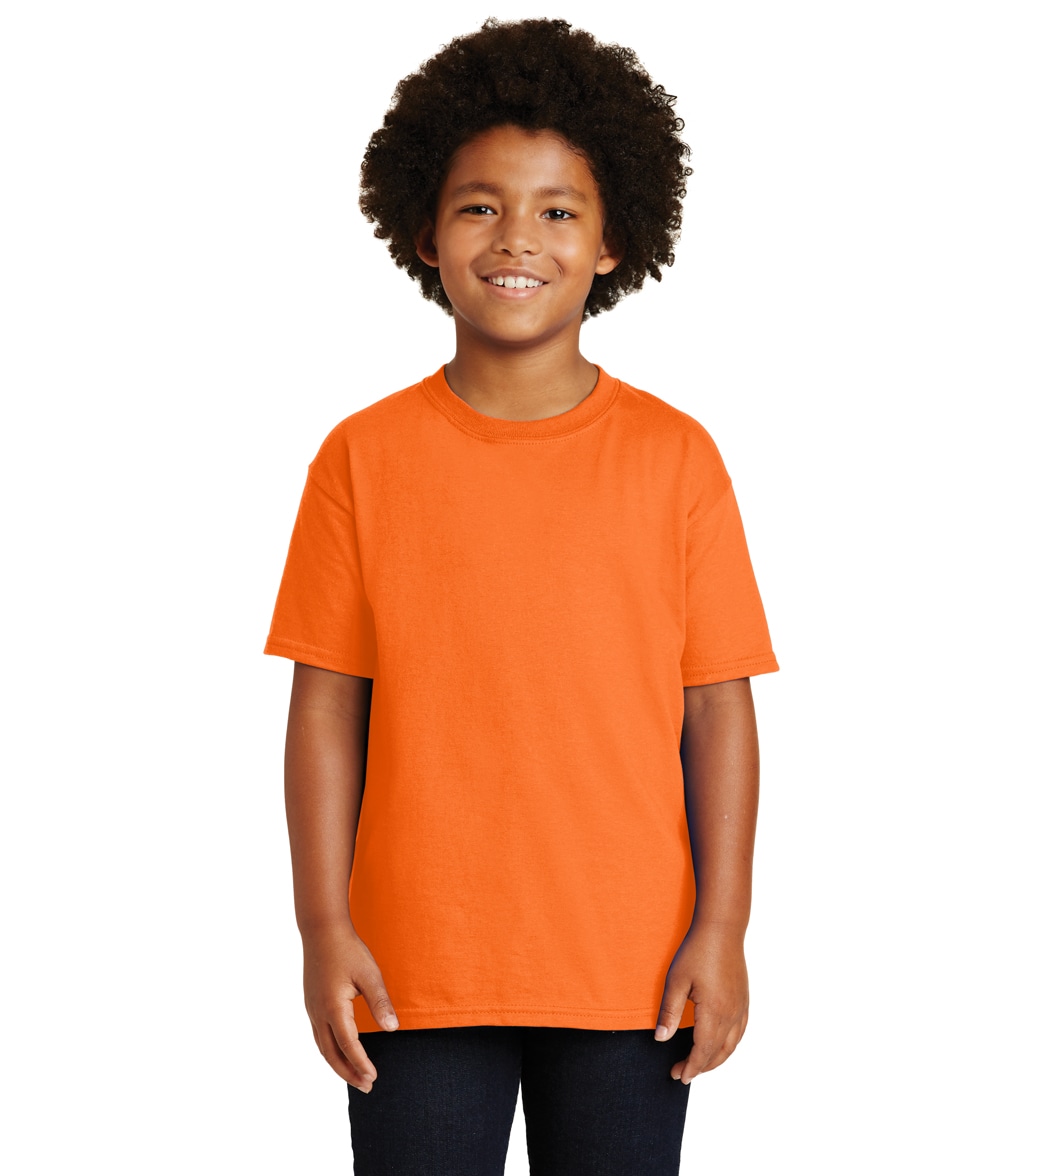 Youth Cotton T Shirt - Brights S. Orange Large Small Cotton/Polyester - Swimoutlet.com